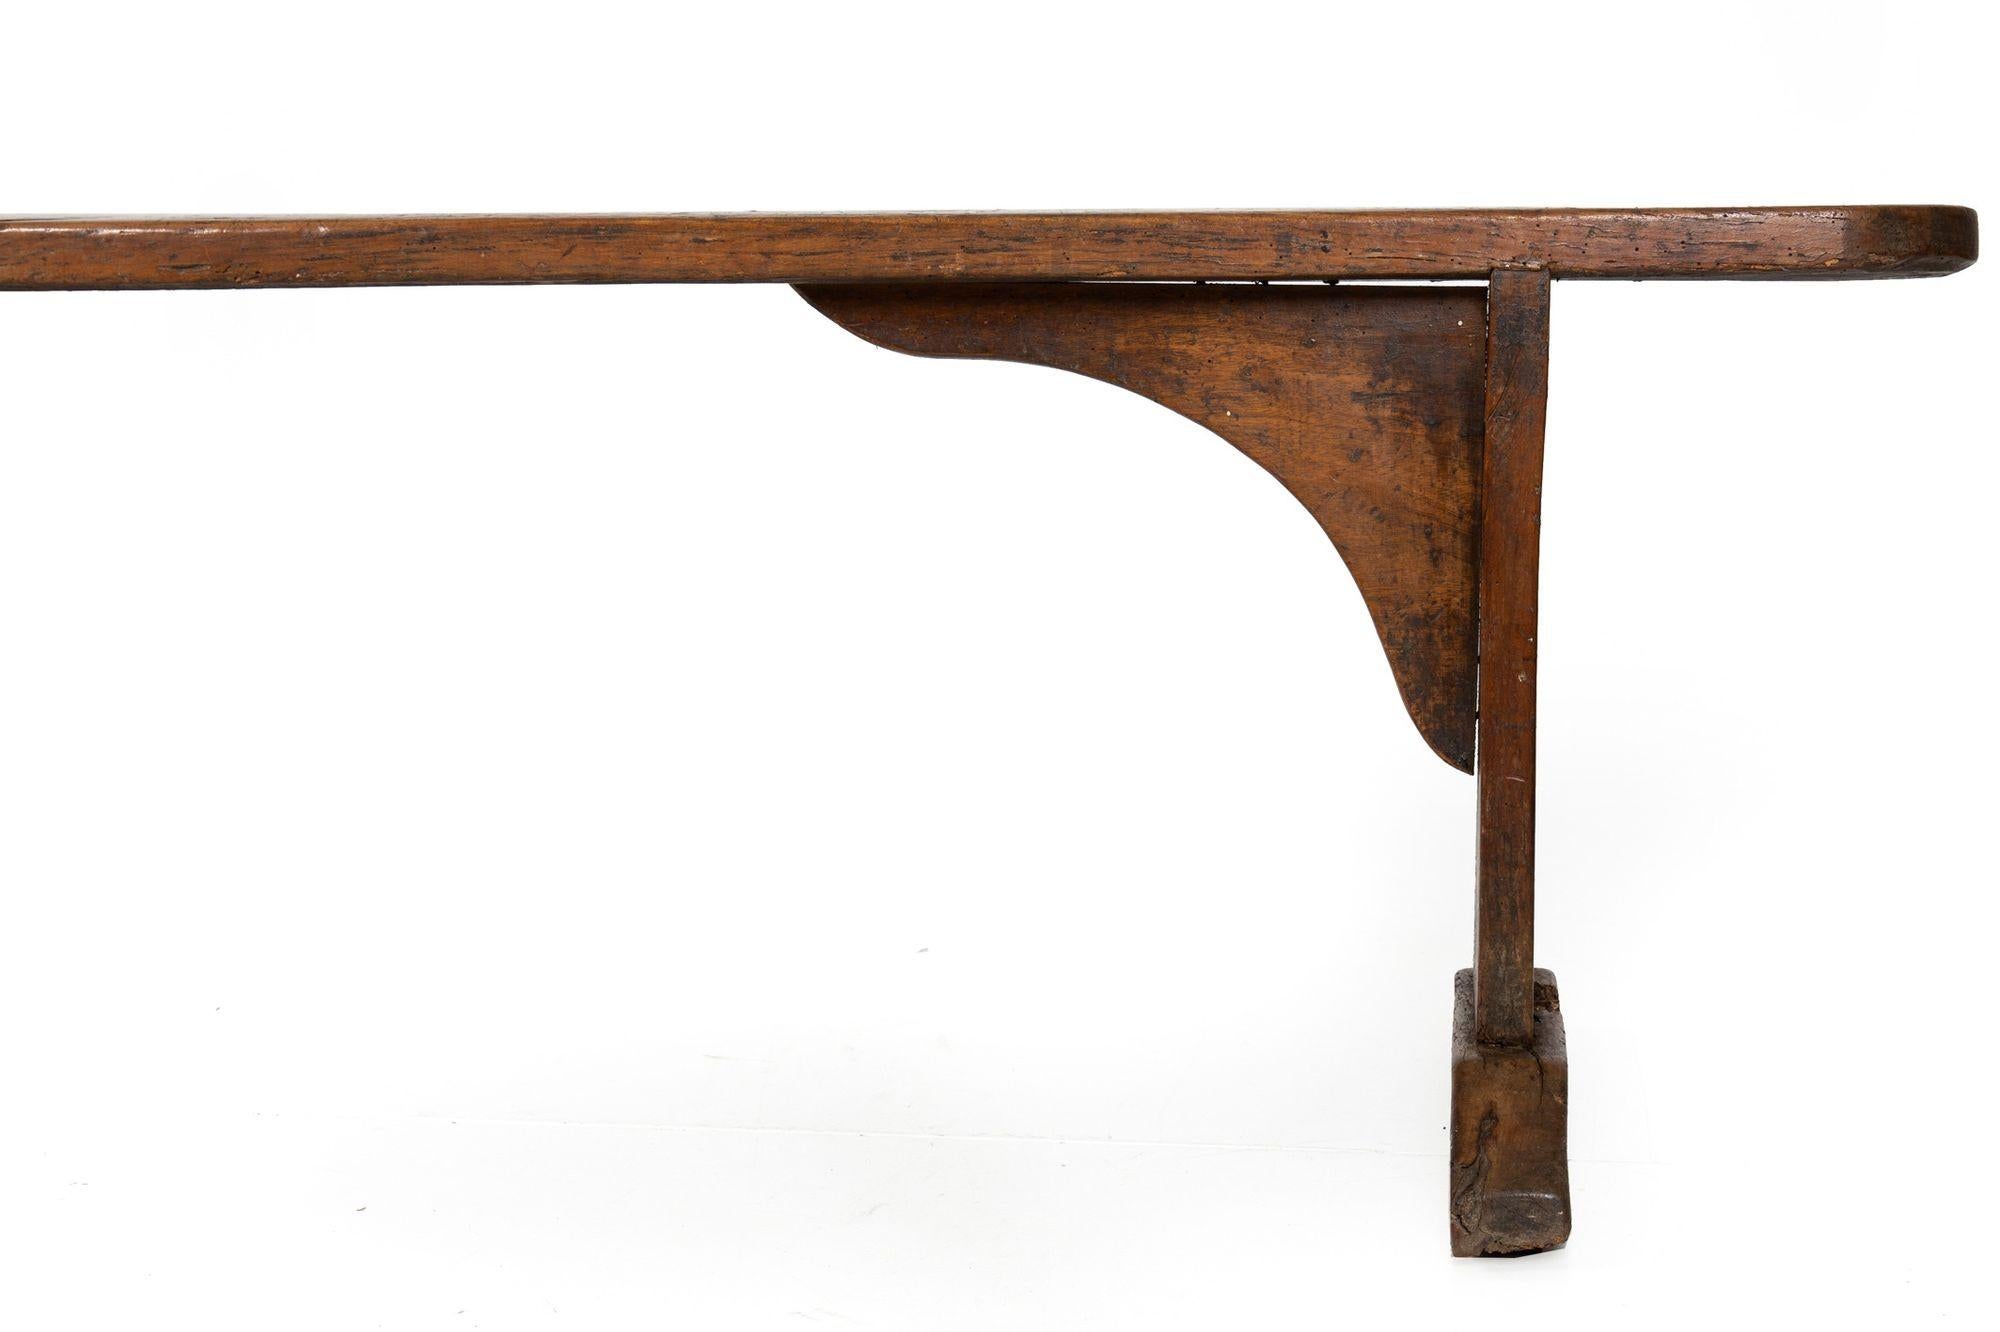 circa 1750 English Georgian Patinated and Worn Elm Trestle Bench For Sale 5